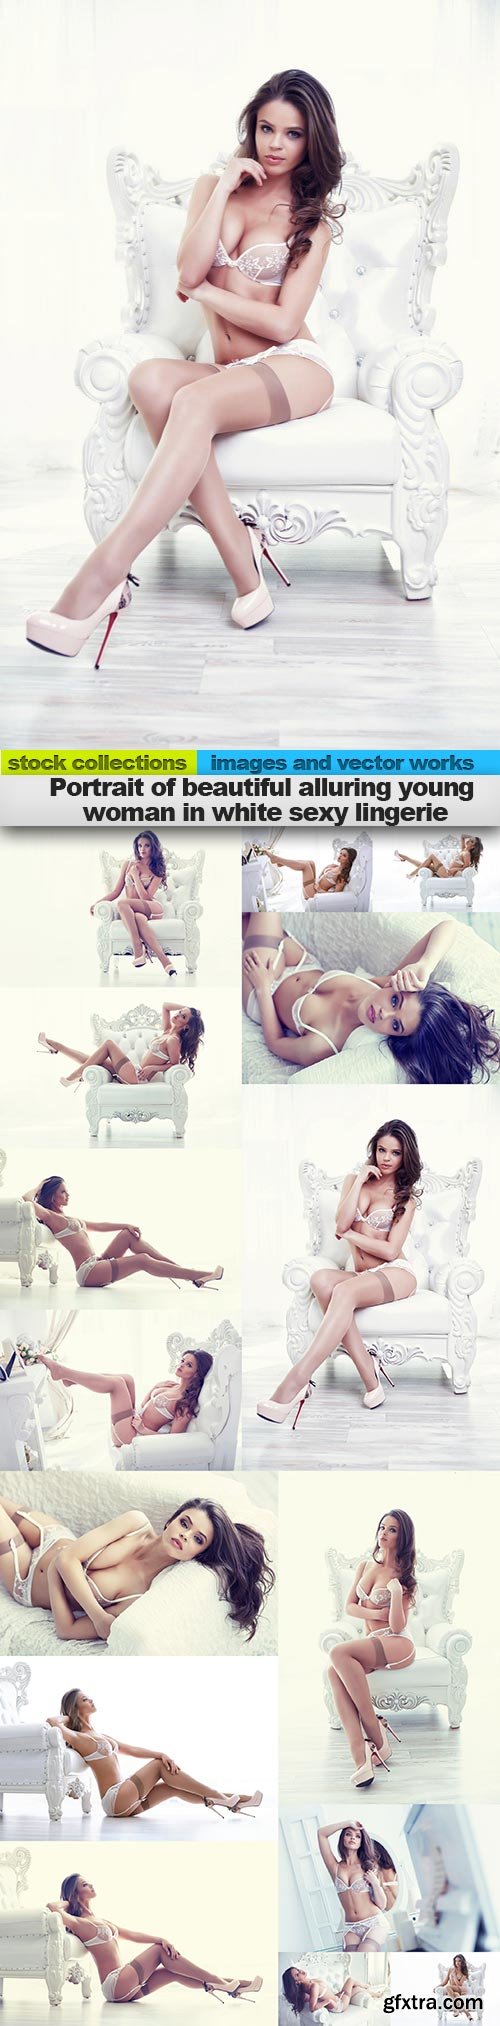 Portrait of beautiful alluring young woman in white sexy lingerie, 15 x UHQ JPEG